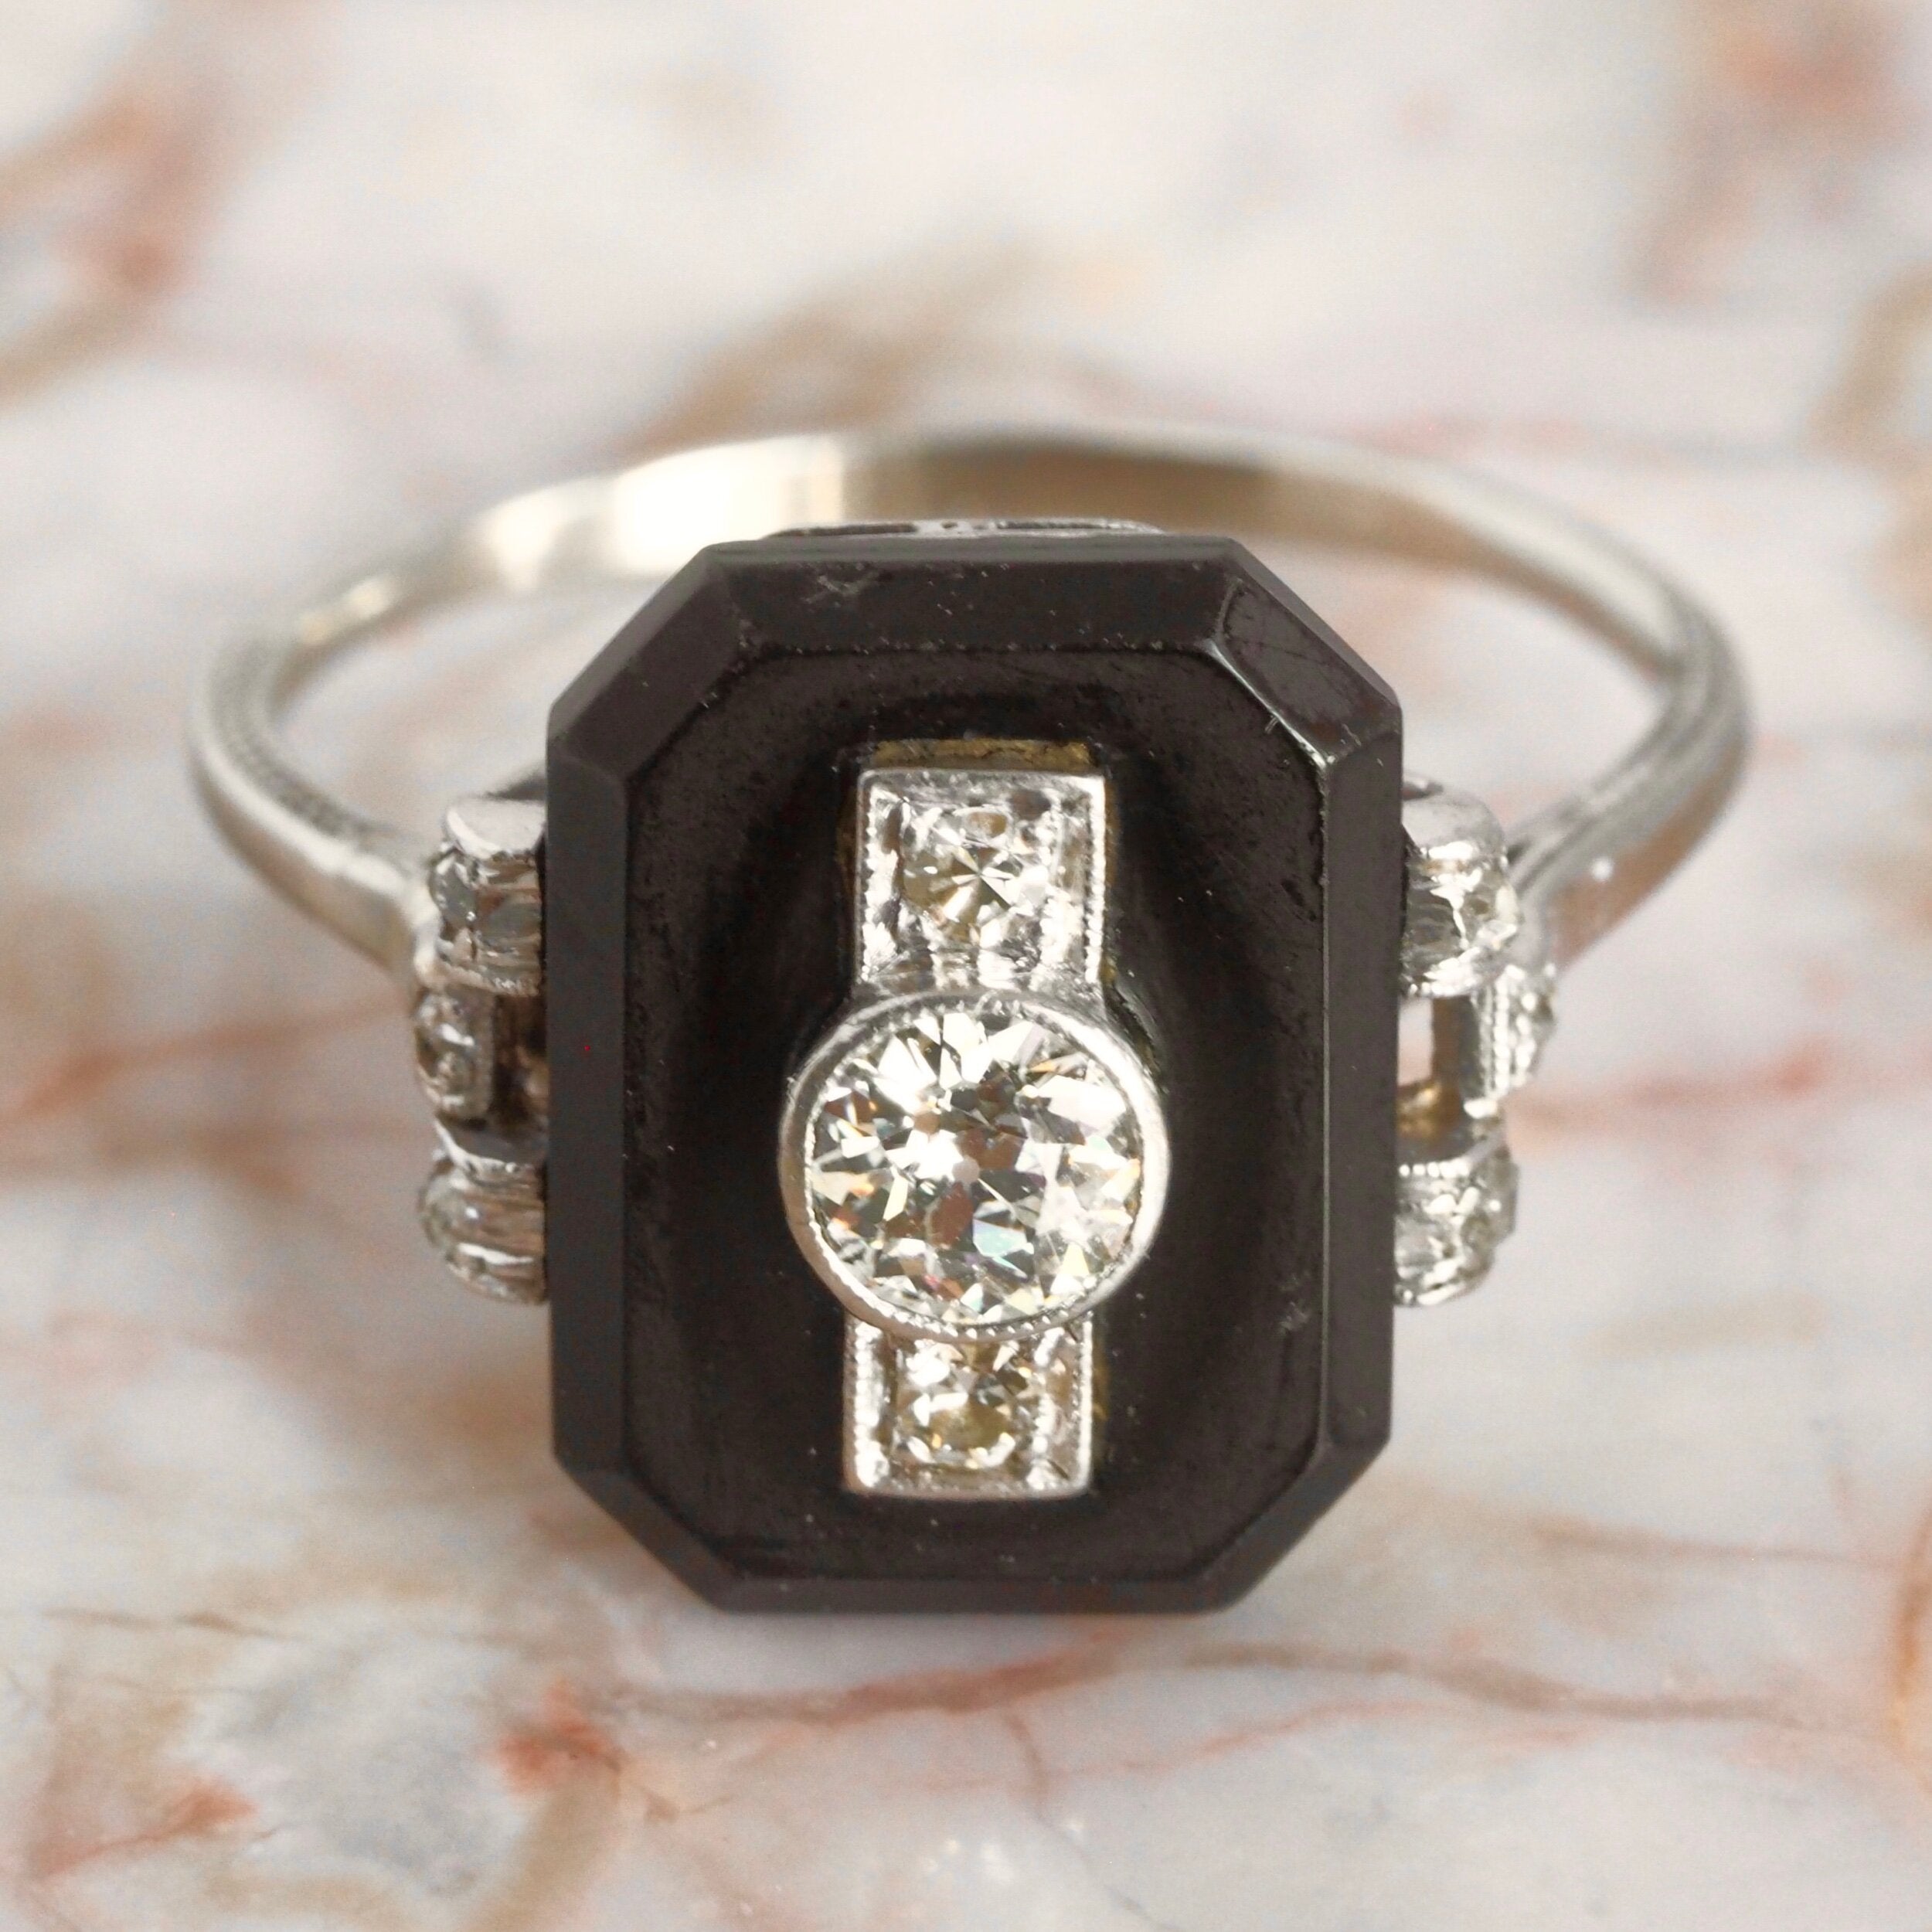 Art Deco 14k White Gold Old Mine Cut and Rose Cut Diamond and Onyx Ring